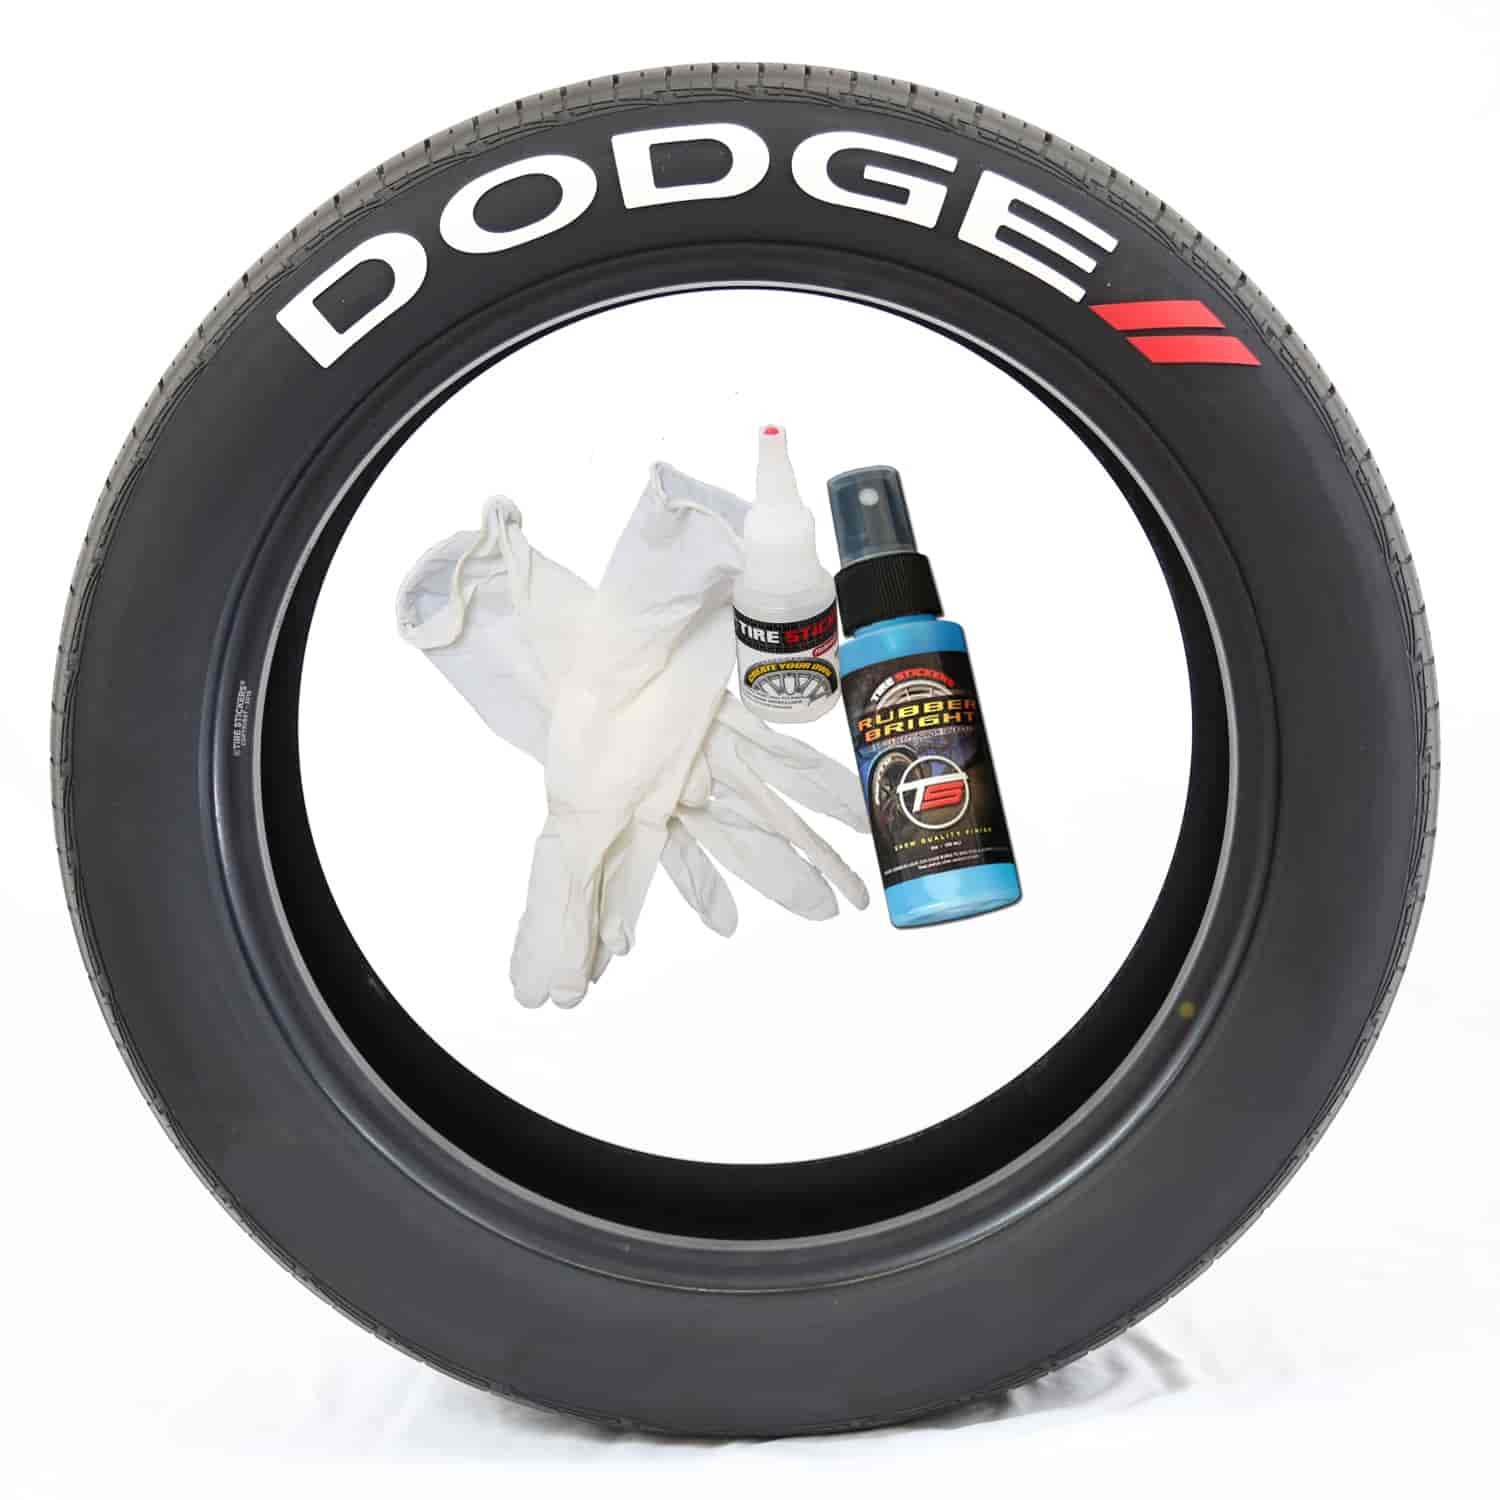 Dodge with Red Dashes Tire Lettering Kit